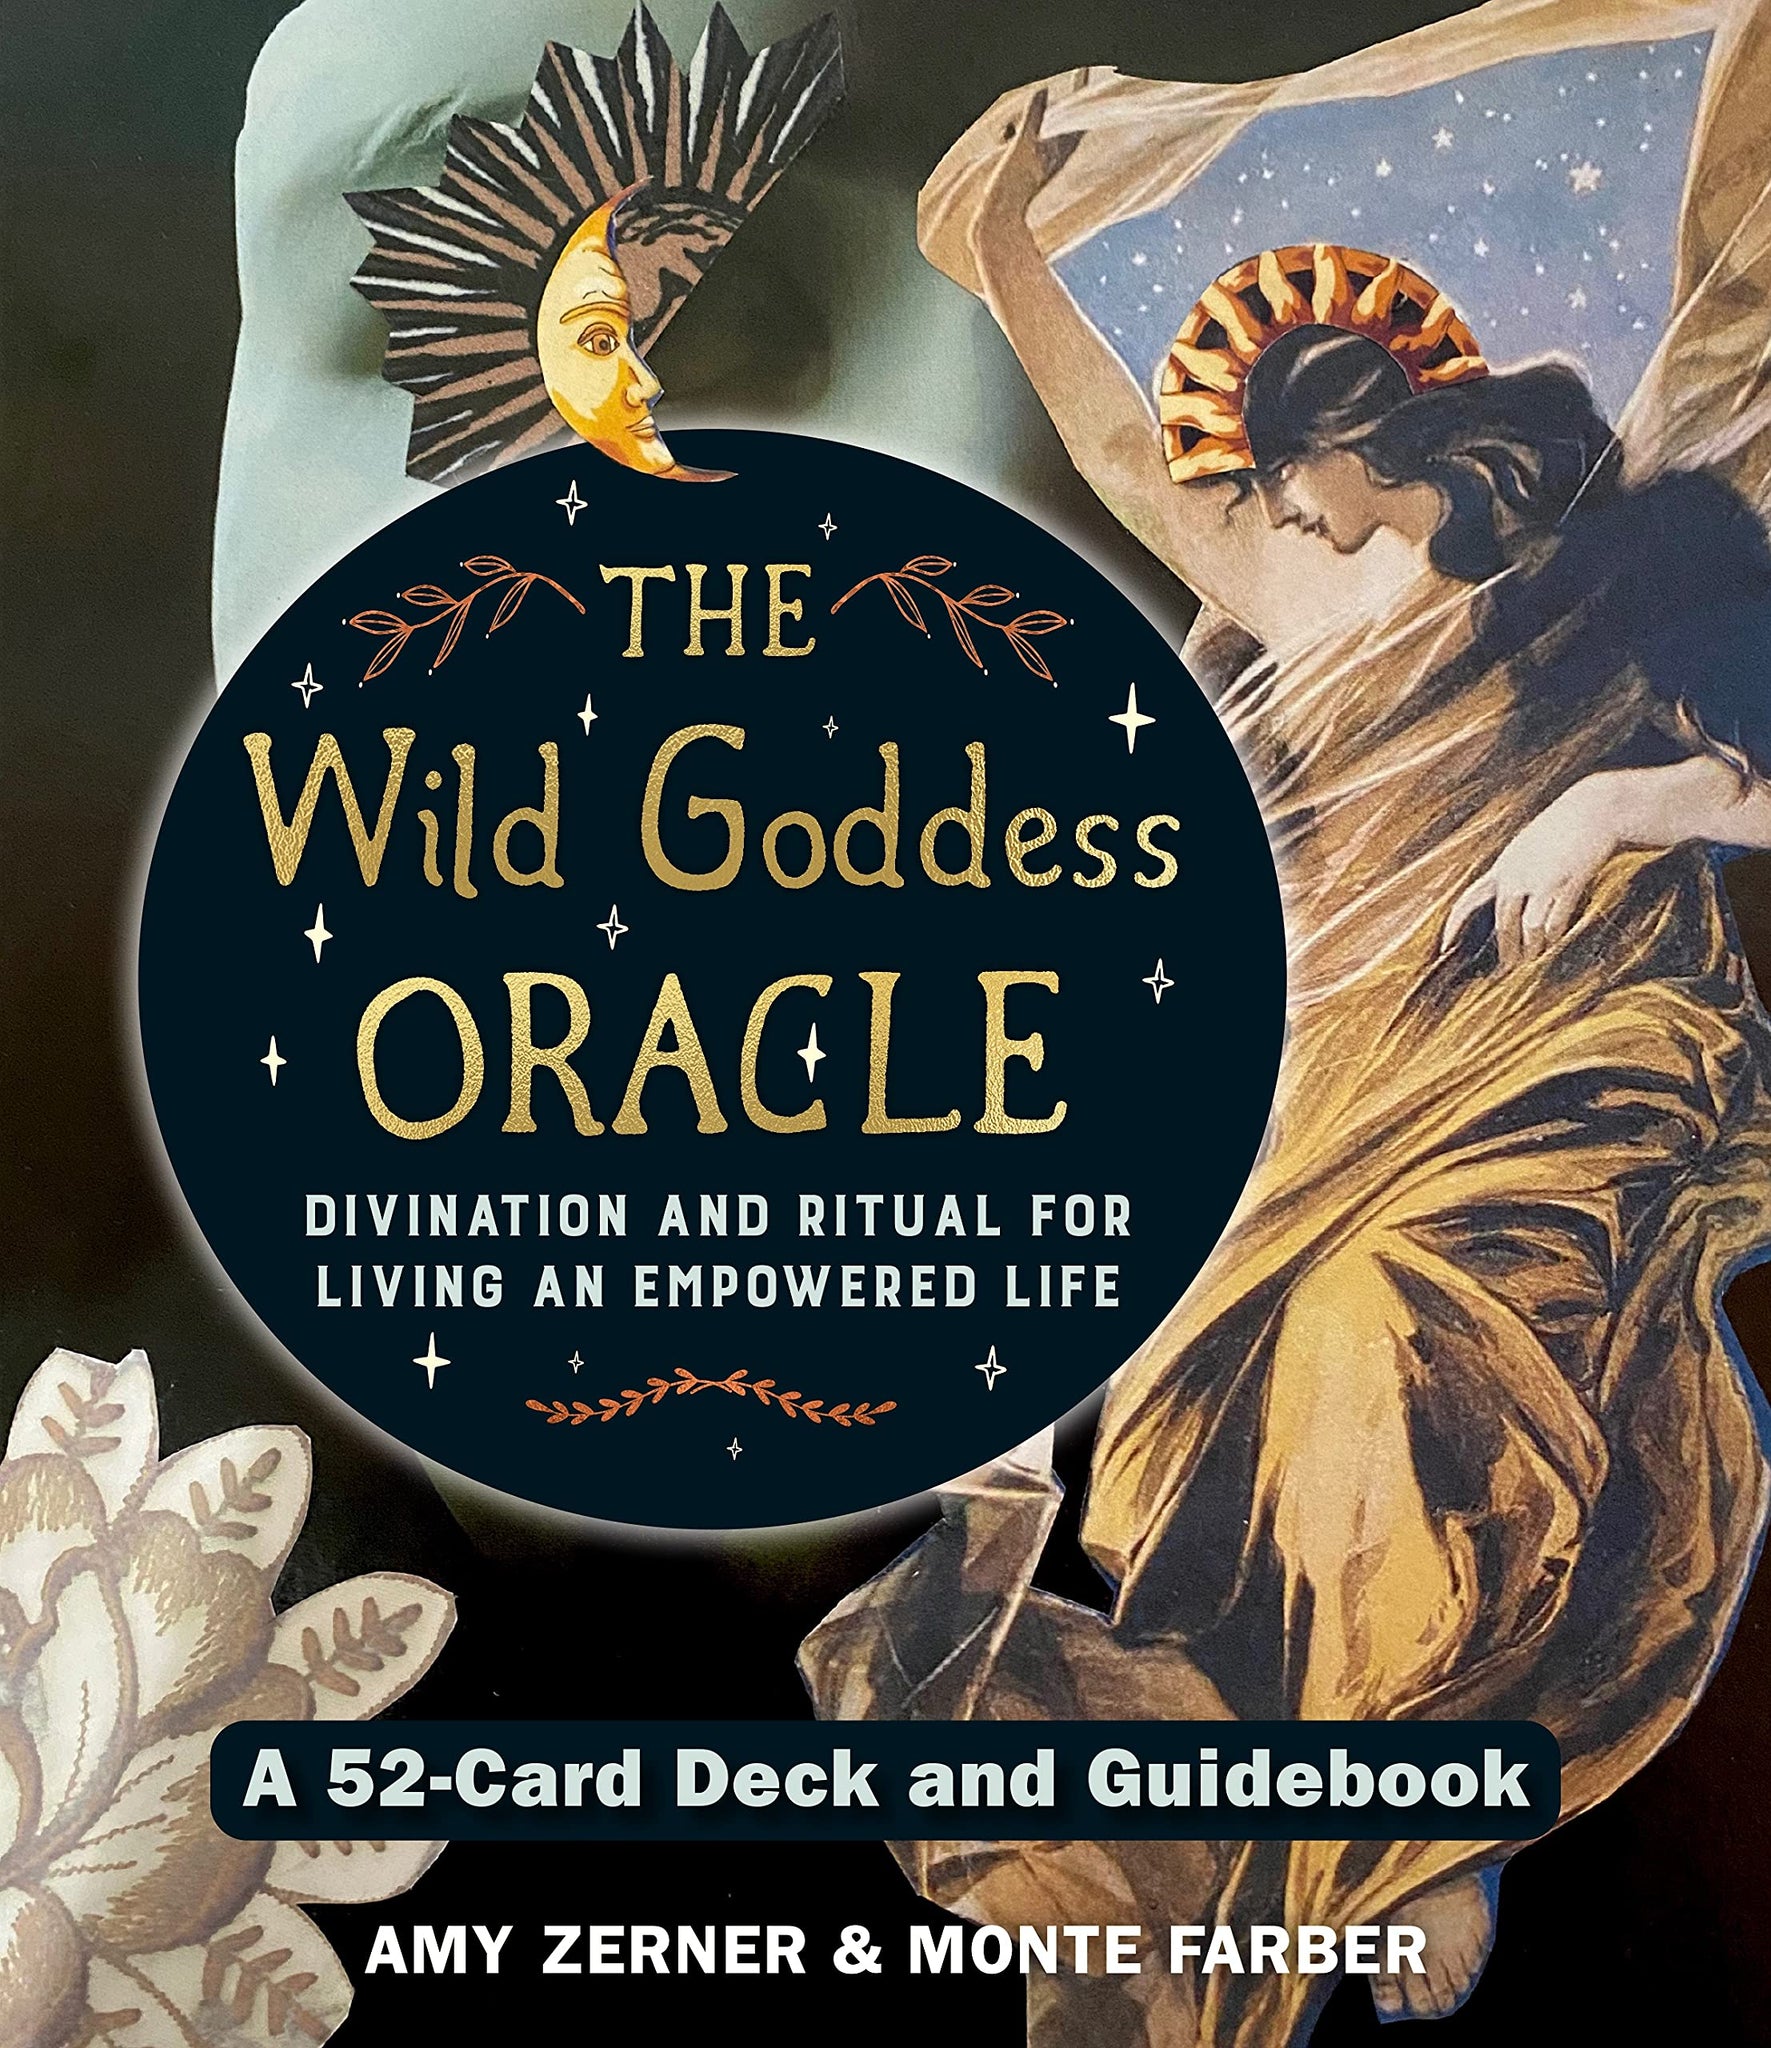 Wild Goddess Oracle Deck and Guidebook: A 52-Card Deck and Guidebook, Divination and Ritual for Living an Empowered Life